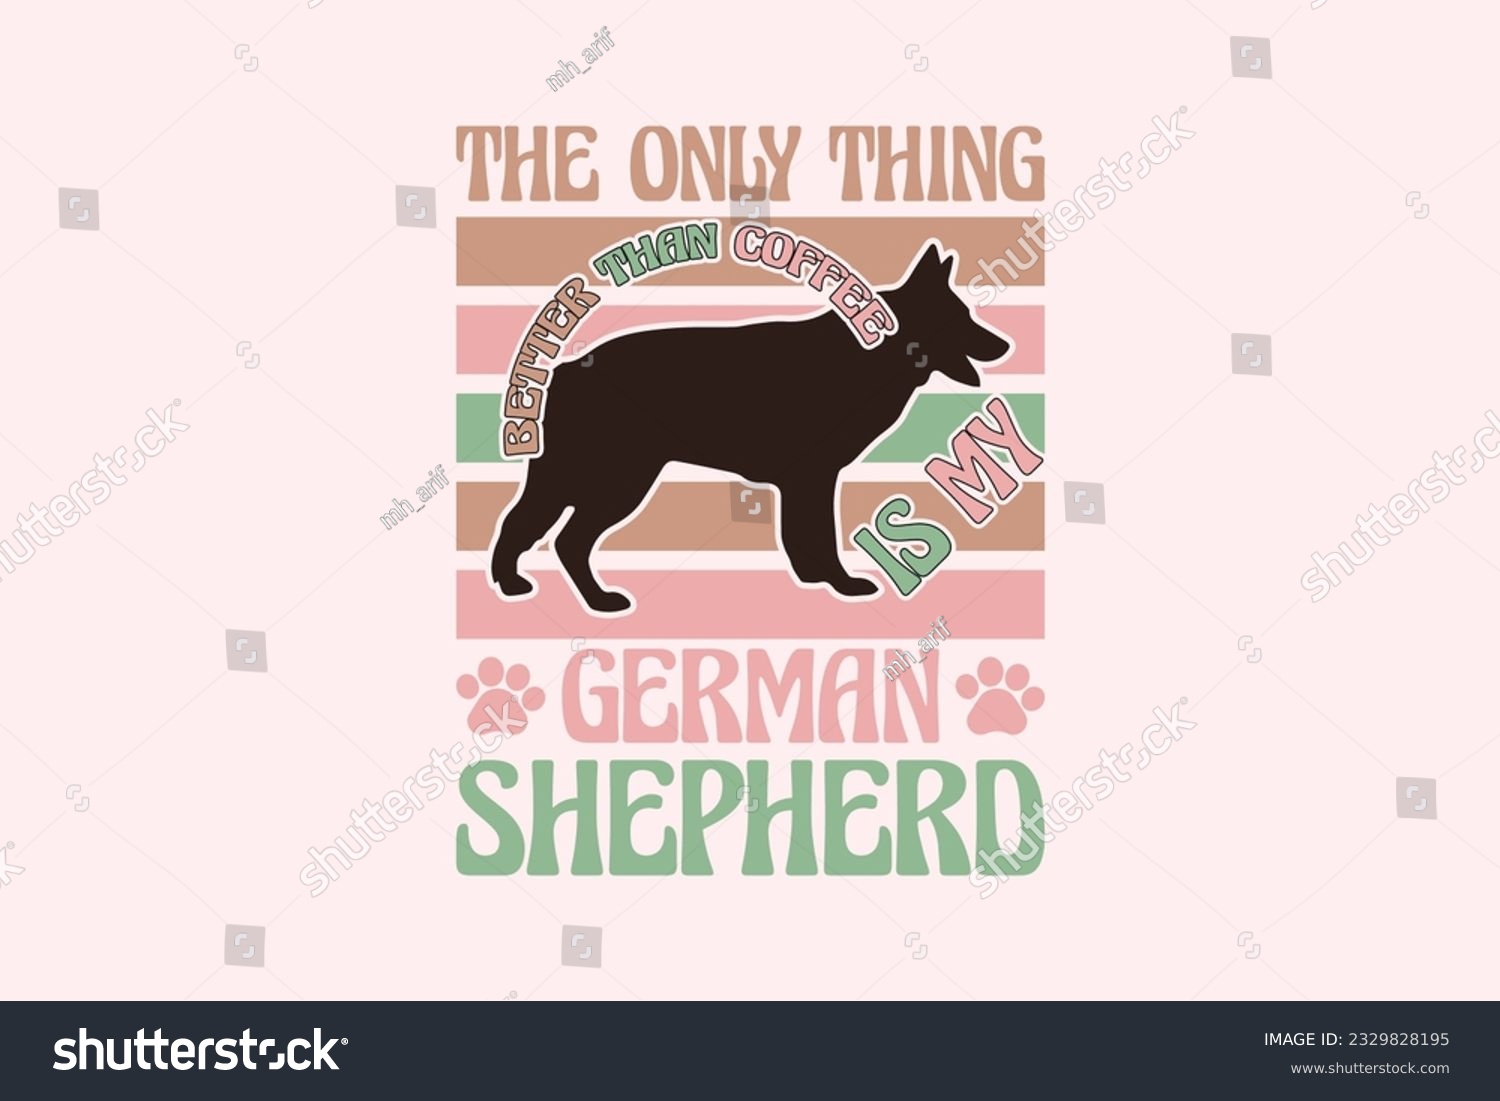 SVG of German Shepherd Dog Quote EPS Design. The Only Thing Better Than Coffee Is My German Shepherd. Vector illustration, can be used as a print for t'shirts, bags, cards and posters svg